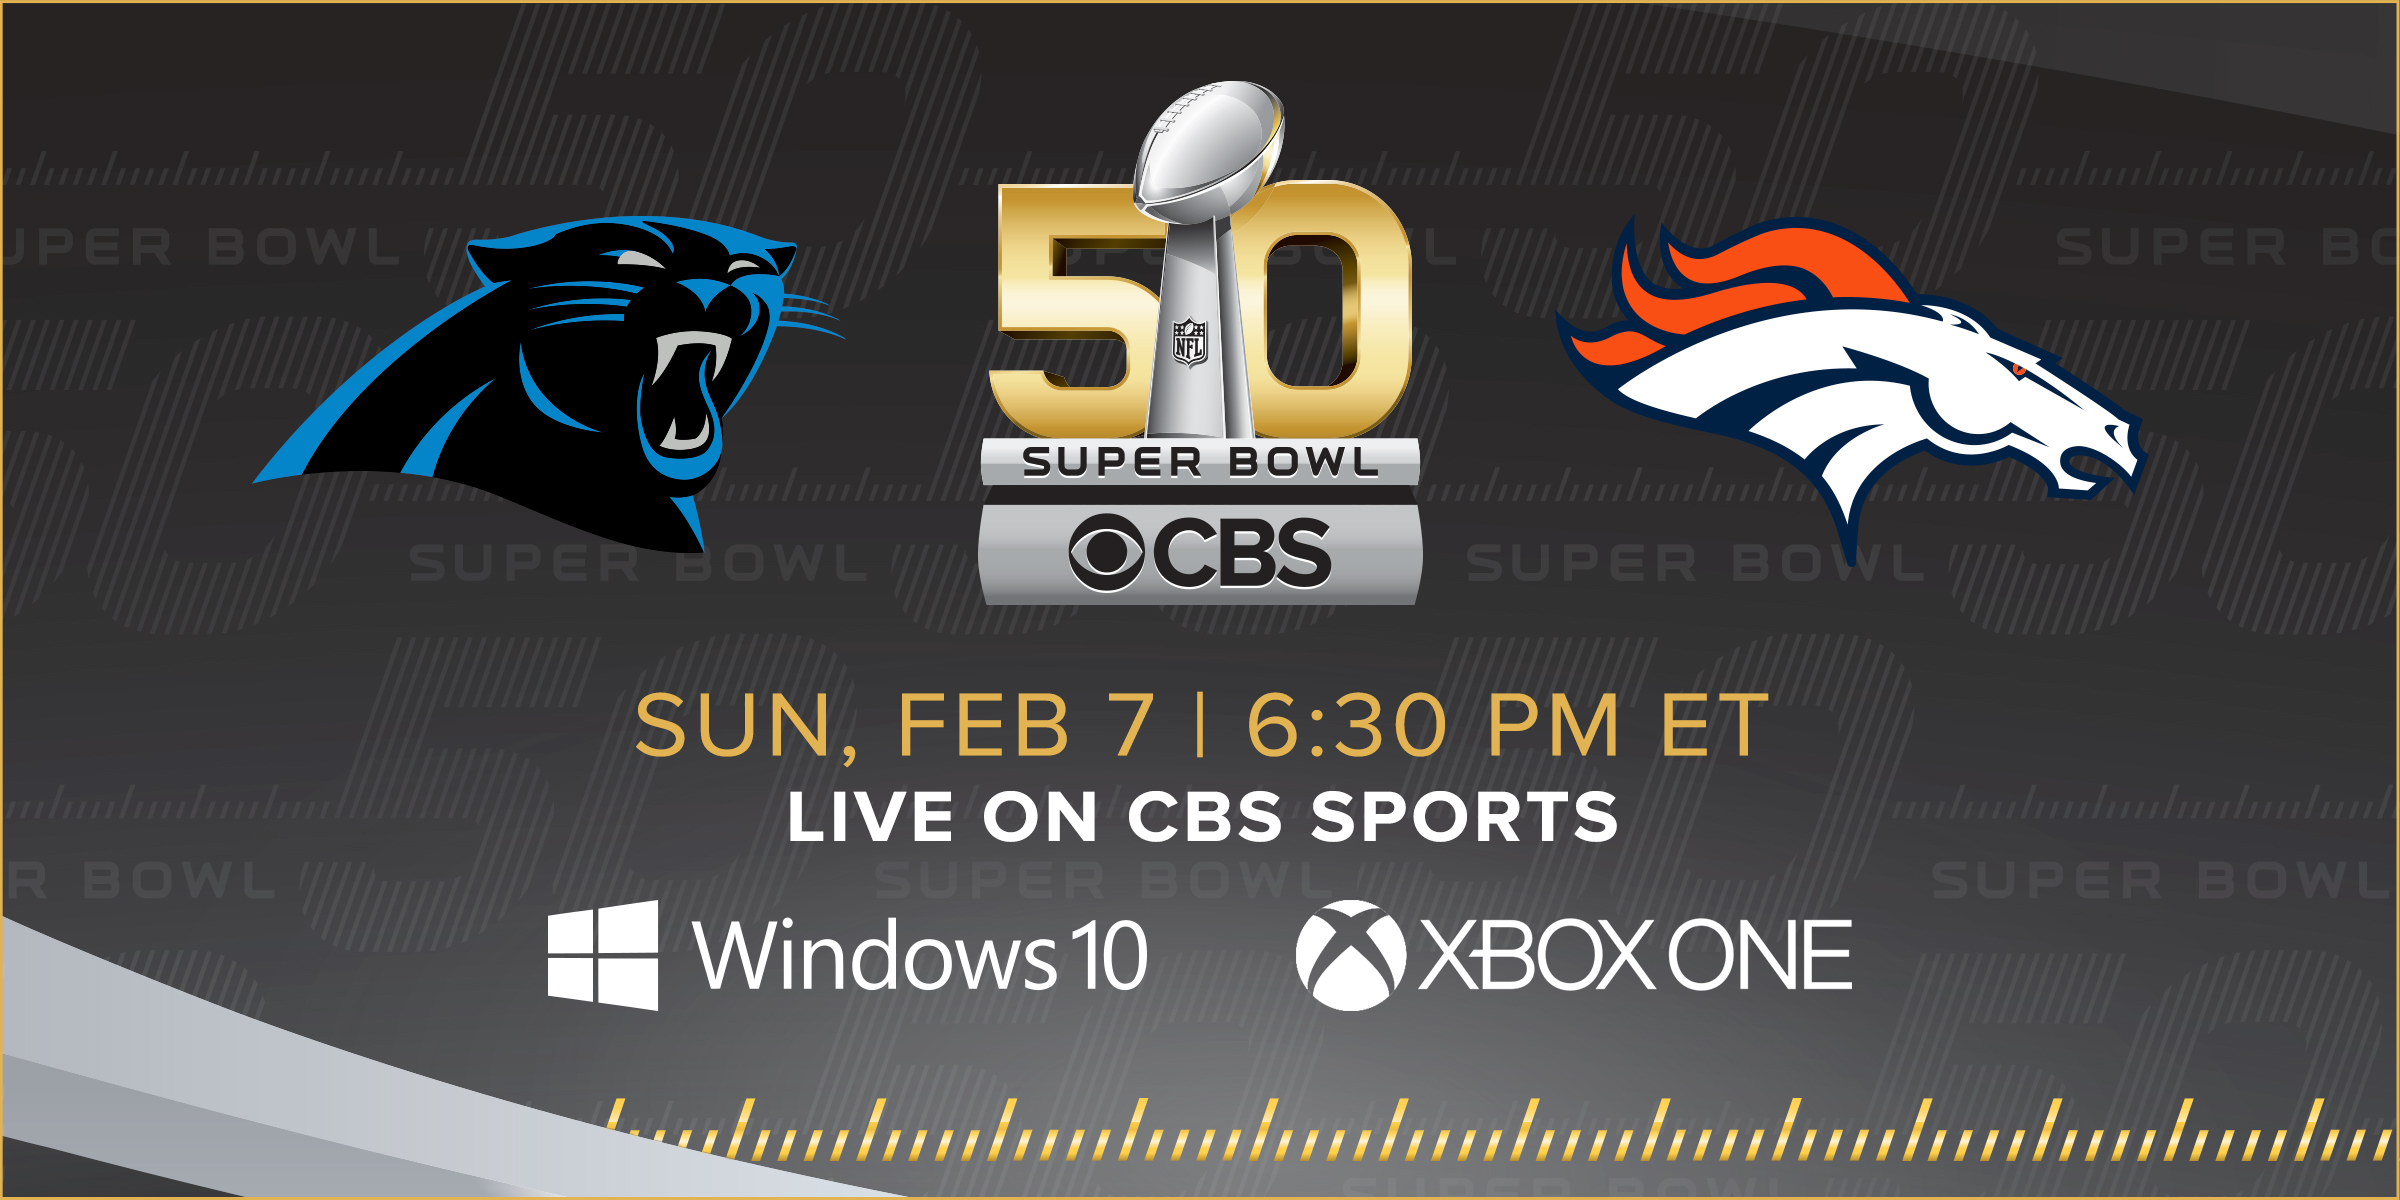 Watch Super Bowl 50 LIVE on the CBS Sports app for Windows 10 and Xbox.